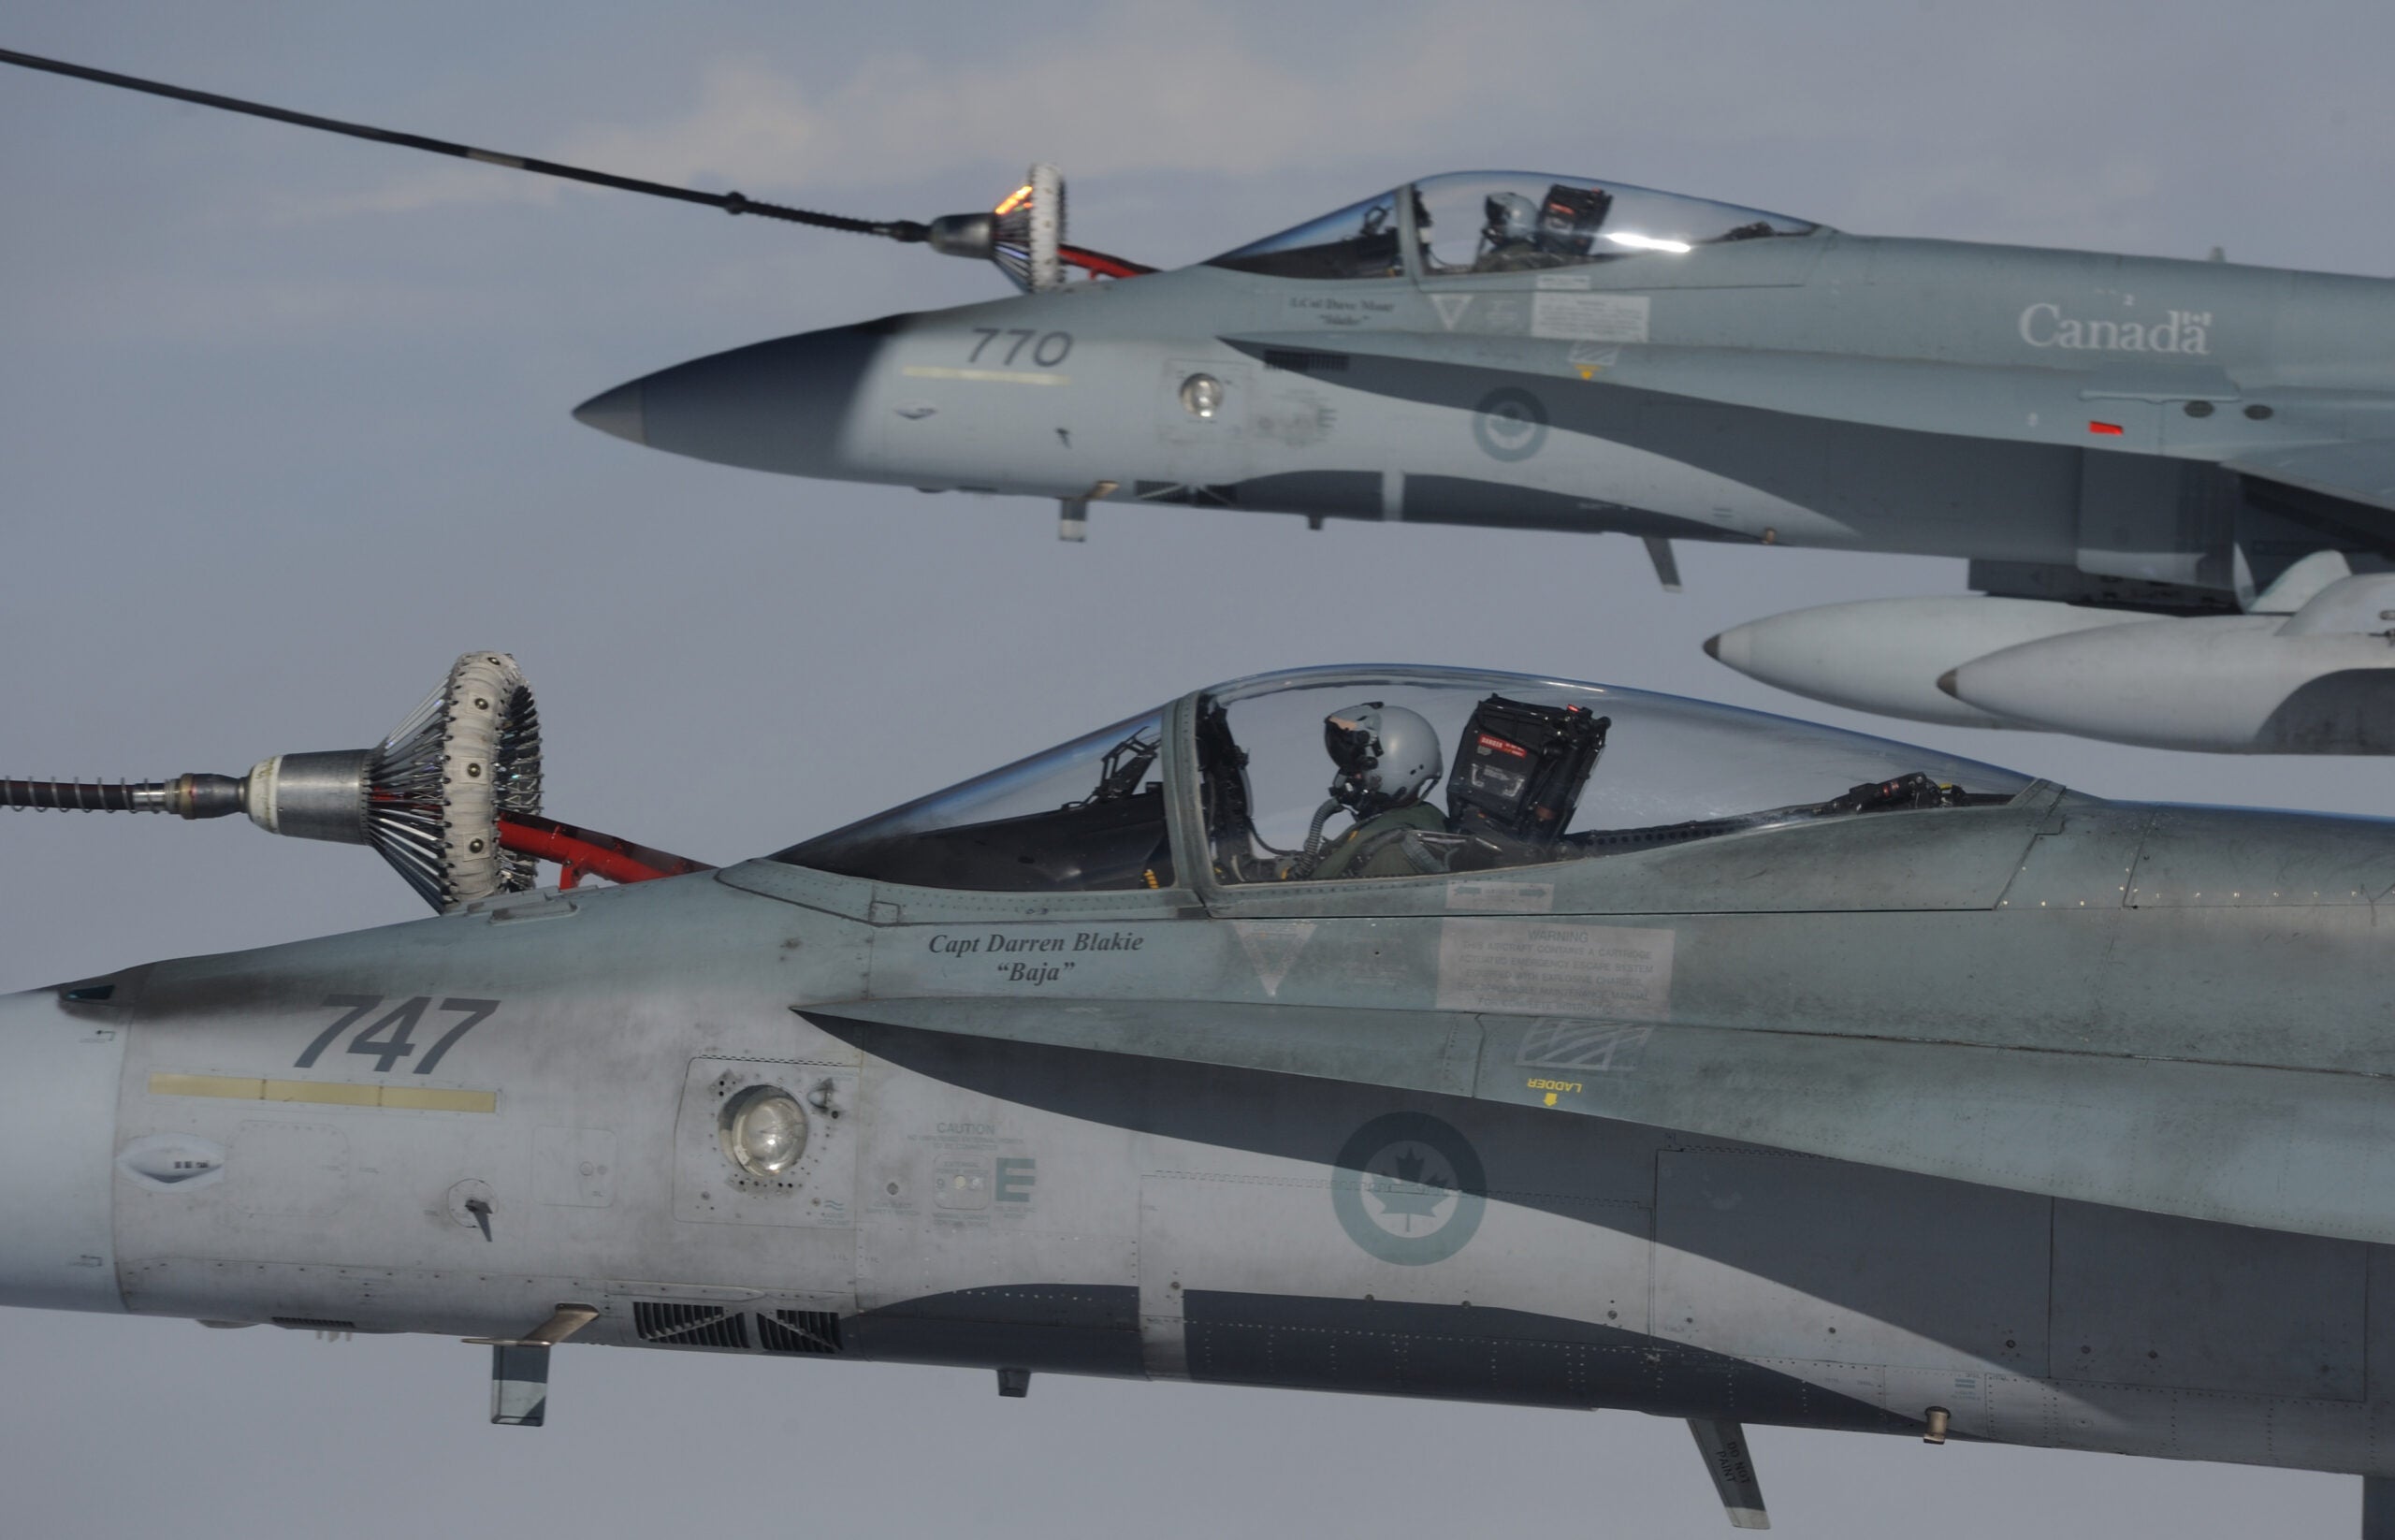 CF-18 Hornet fighter aircraft from 409 Squadron in Cold Lake, Alberta refuel in the air during Exercise Vigilant Eagle 13 on Aug. 28, 2013.
Photo: Cpl. Vicky Lefrancois, DAirPA
FA2013-5100-12